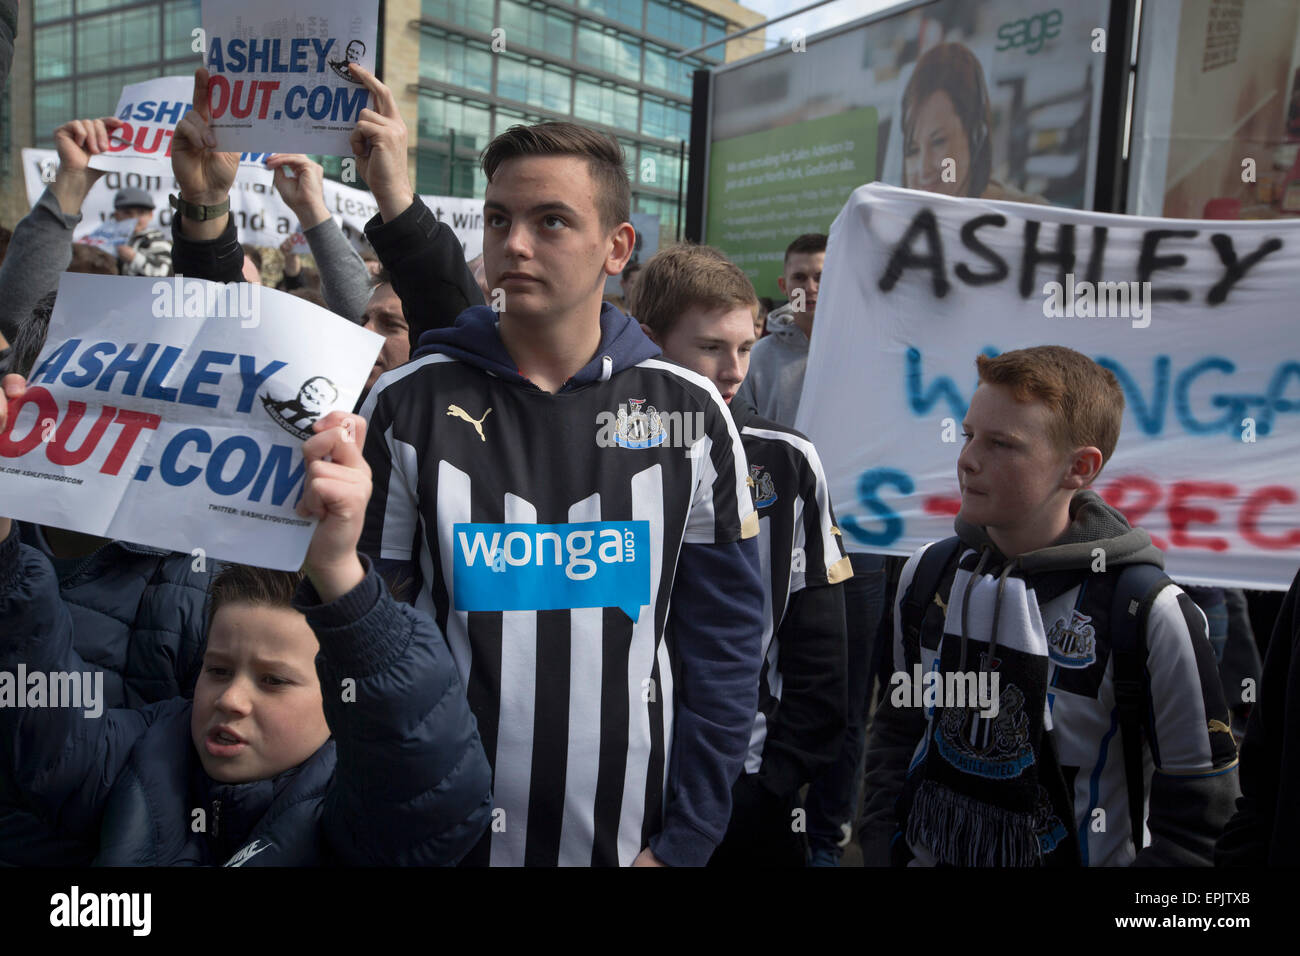 Protesters holding signs during a demonstration at the Gallowgate end of the stadium before Newcastle United host Tottenham Hotspurs in an English Premier League match at St. James' Park. The match was boycotted by a section of the home support critical of the role of owner Mike Ashley and sponsorship by a payday loan company. The match was won by Spurs by 3-1, watched by 47,427, the lowest league gate of the season at the stadium. Stock Photo